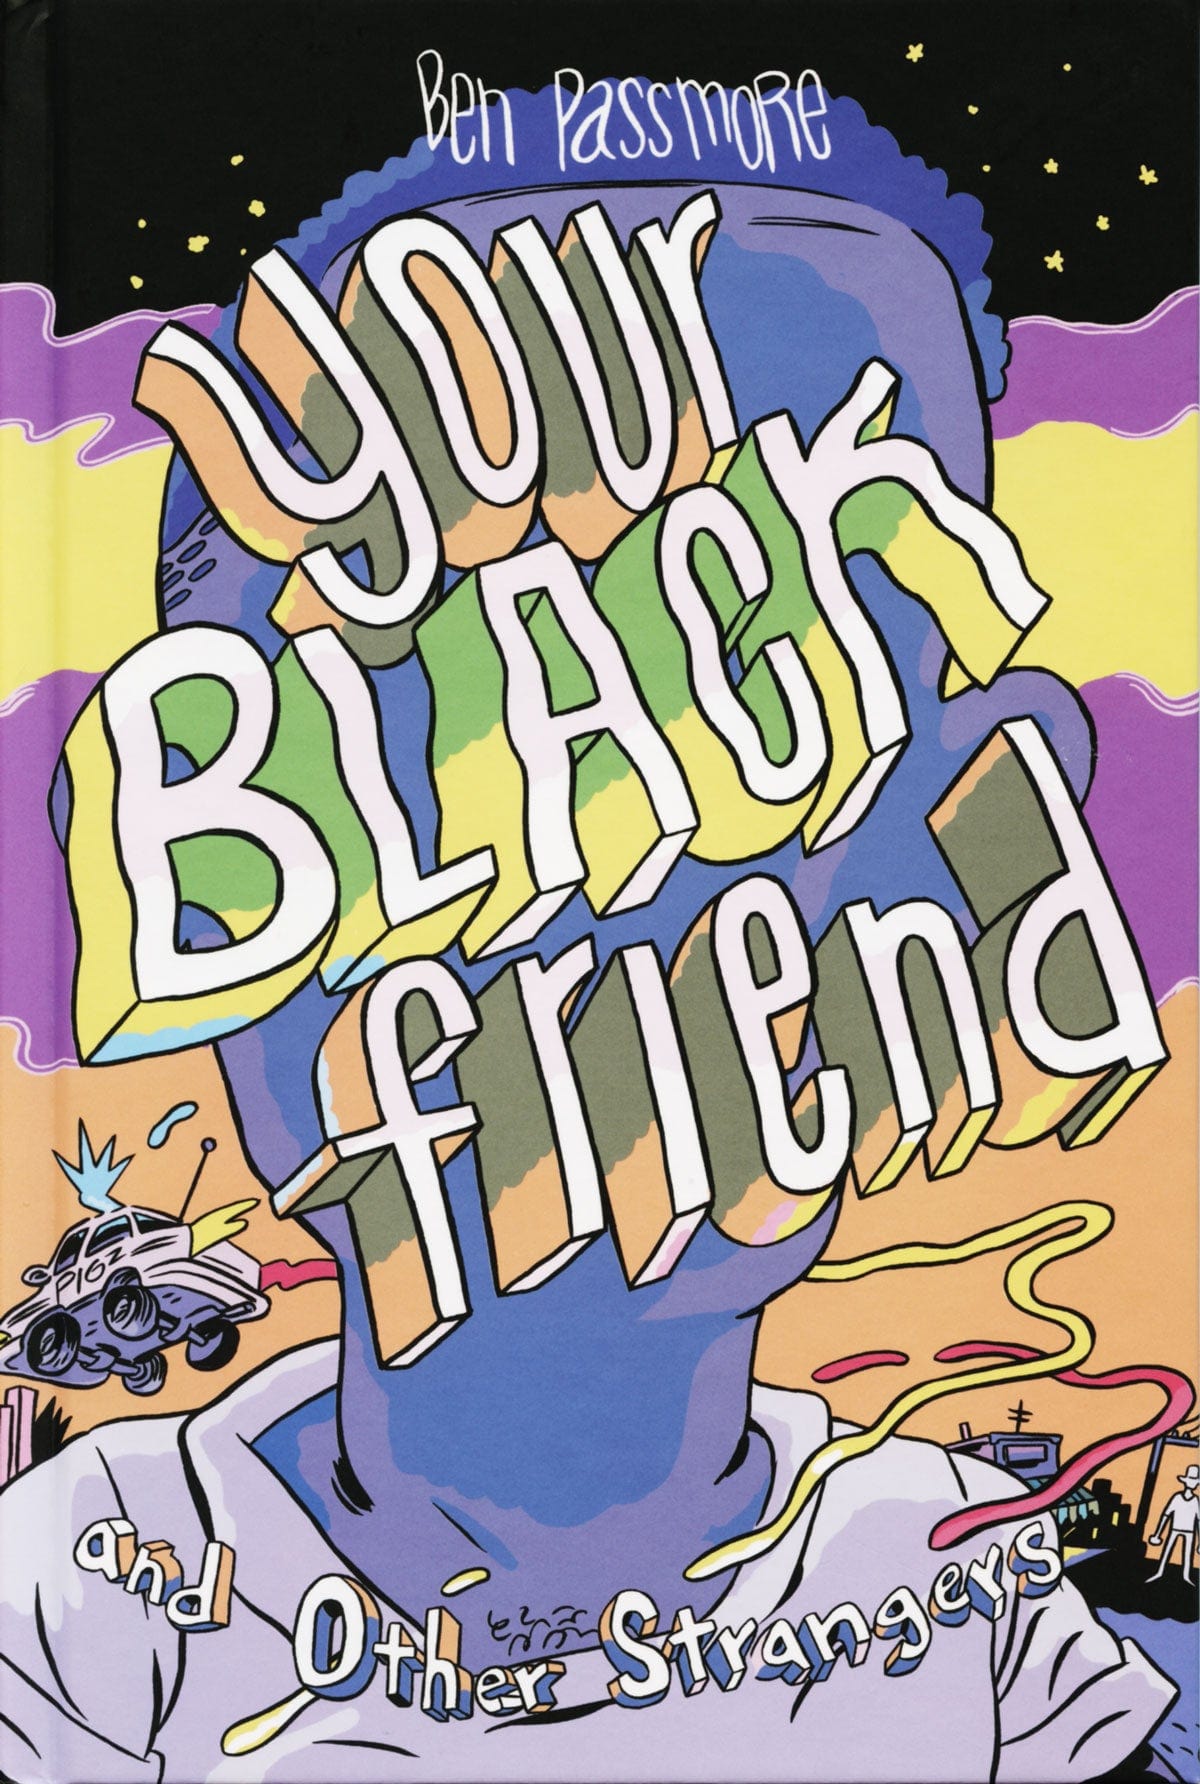 radiator comics Your Black Friend and Other Strangers by Ben Passmore